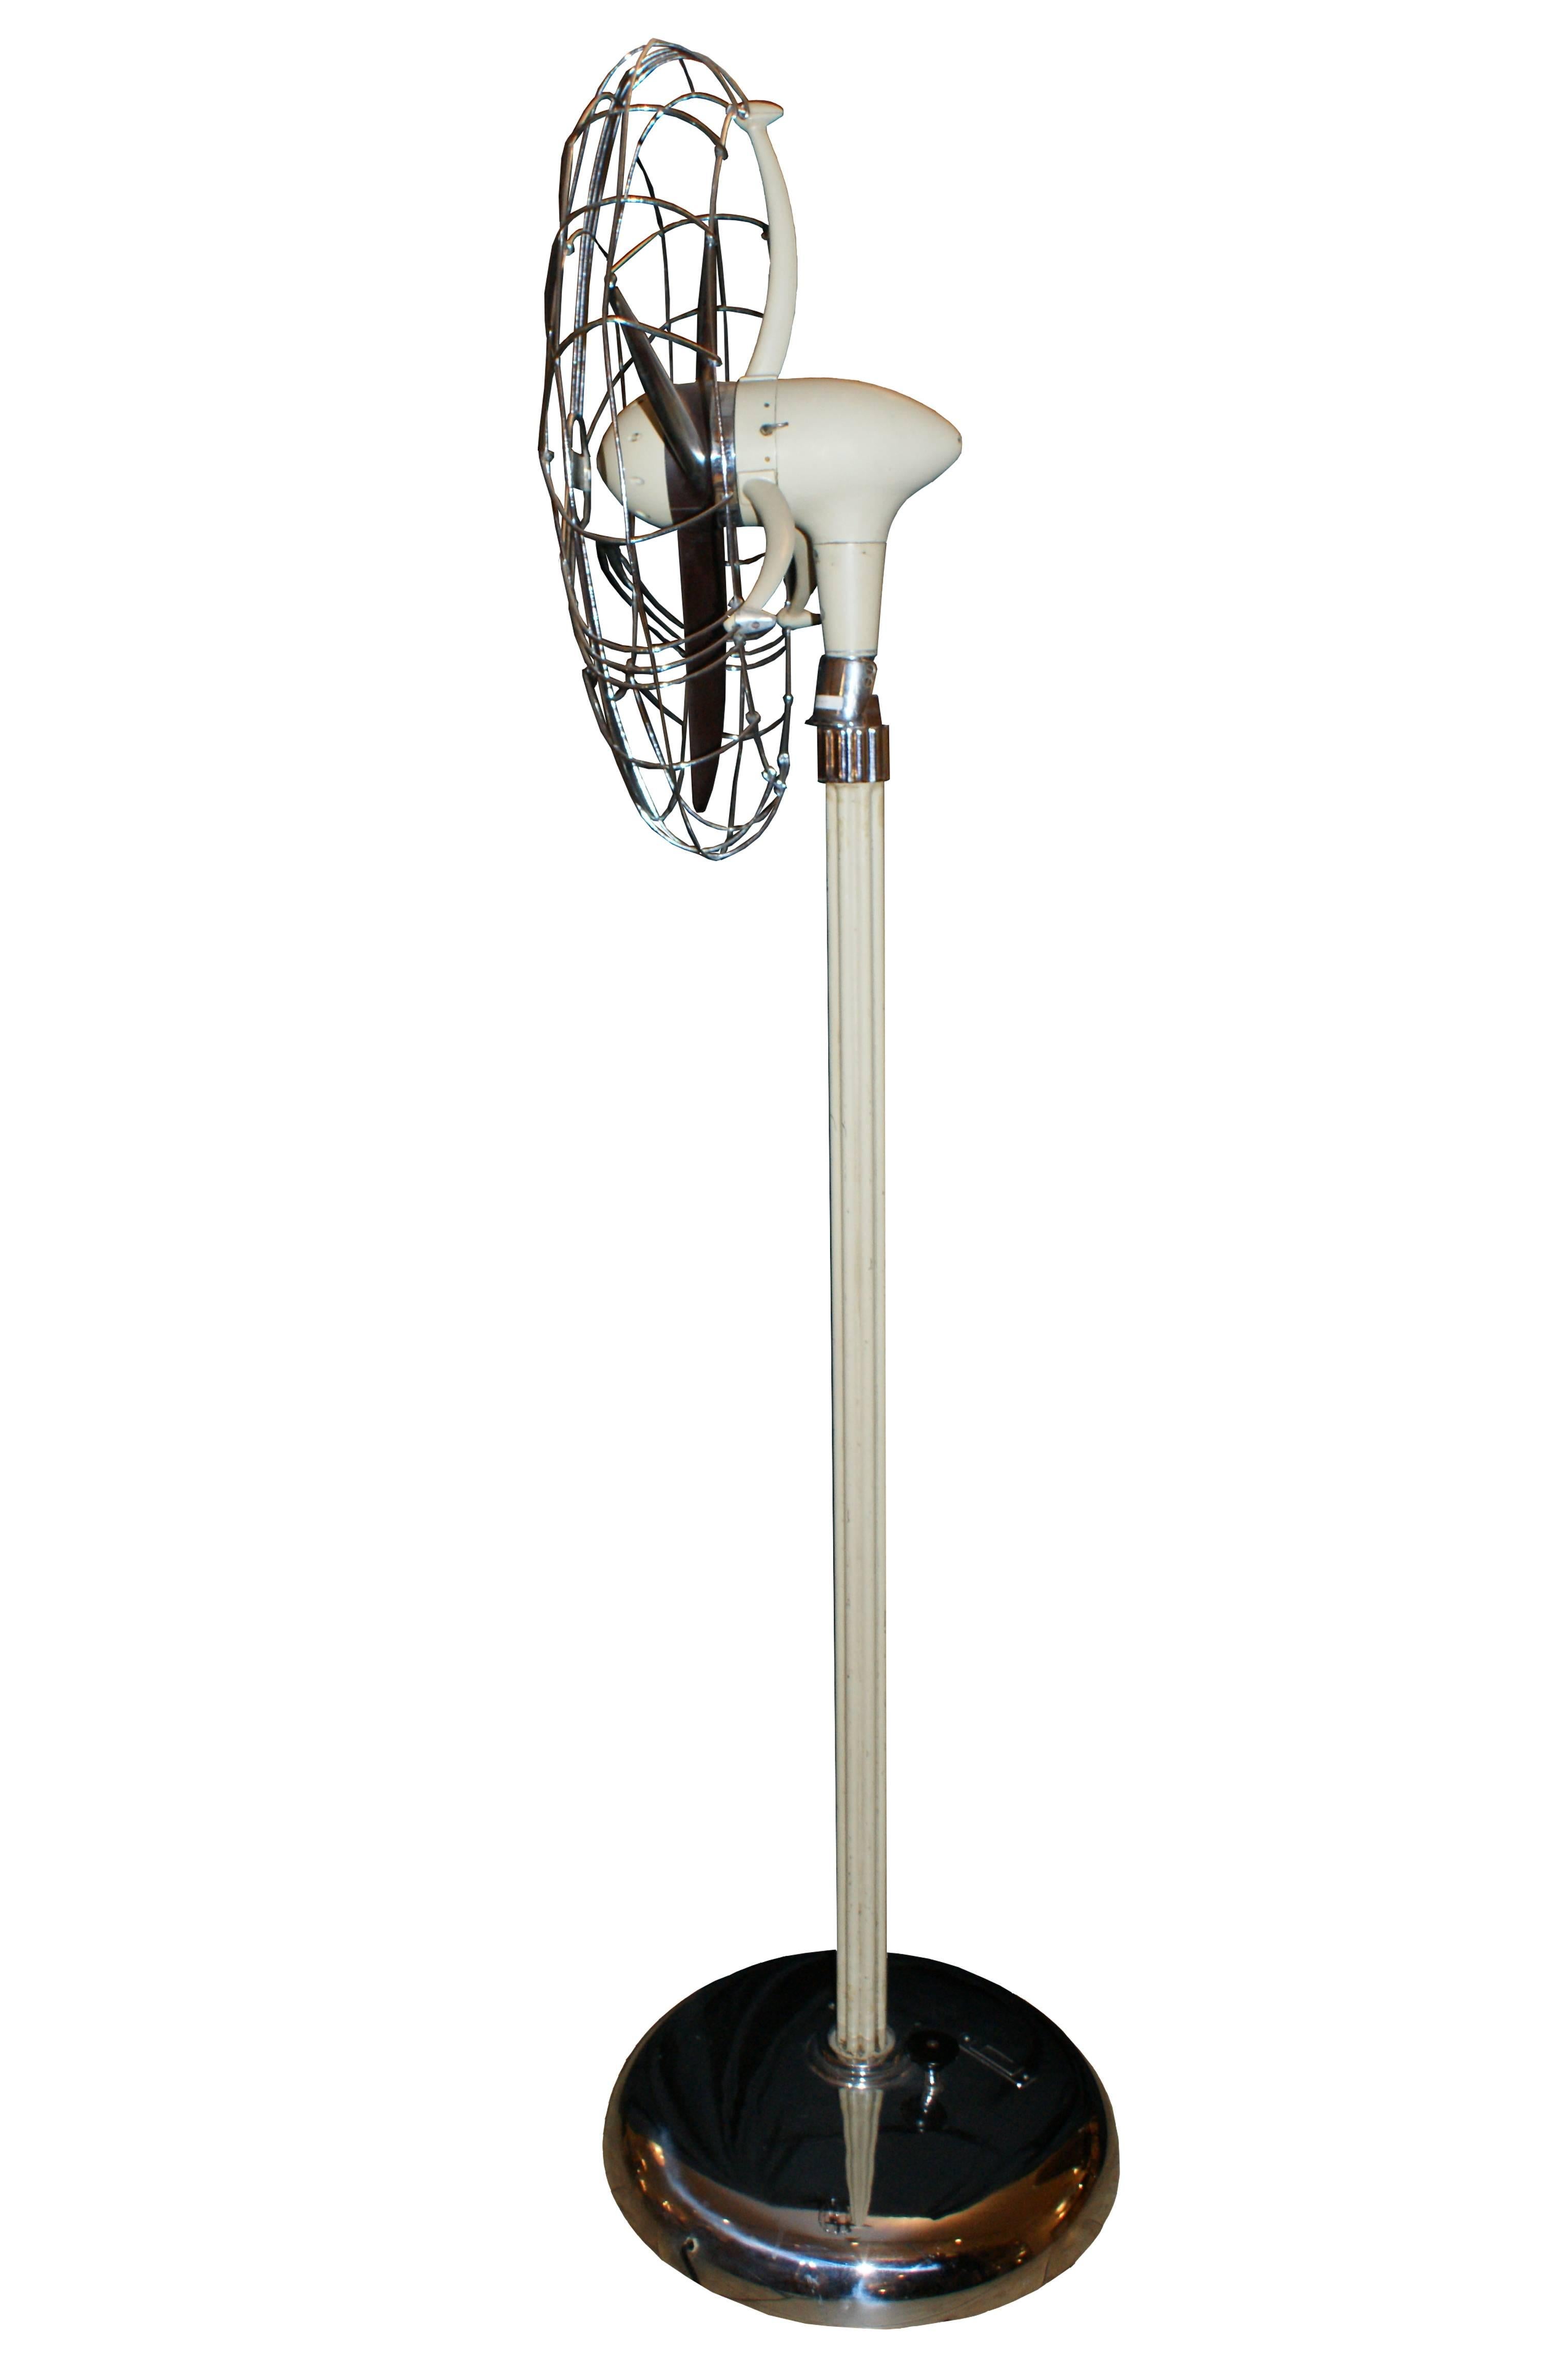 Marelli floor fan with fluted white lacquered iron shaft. Top with chromed metal protect blades and vanes made of Bakelite, Italy, circa 1950. Available in three different colors: Iron base and brown blades.
Green iron base and white